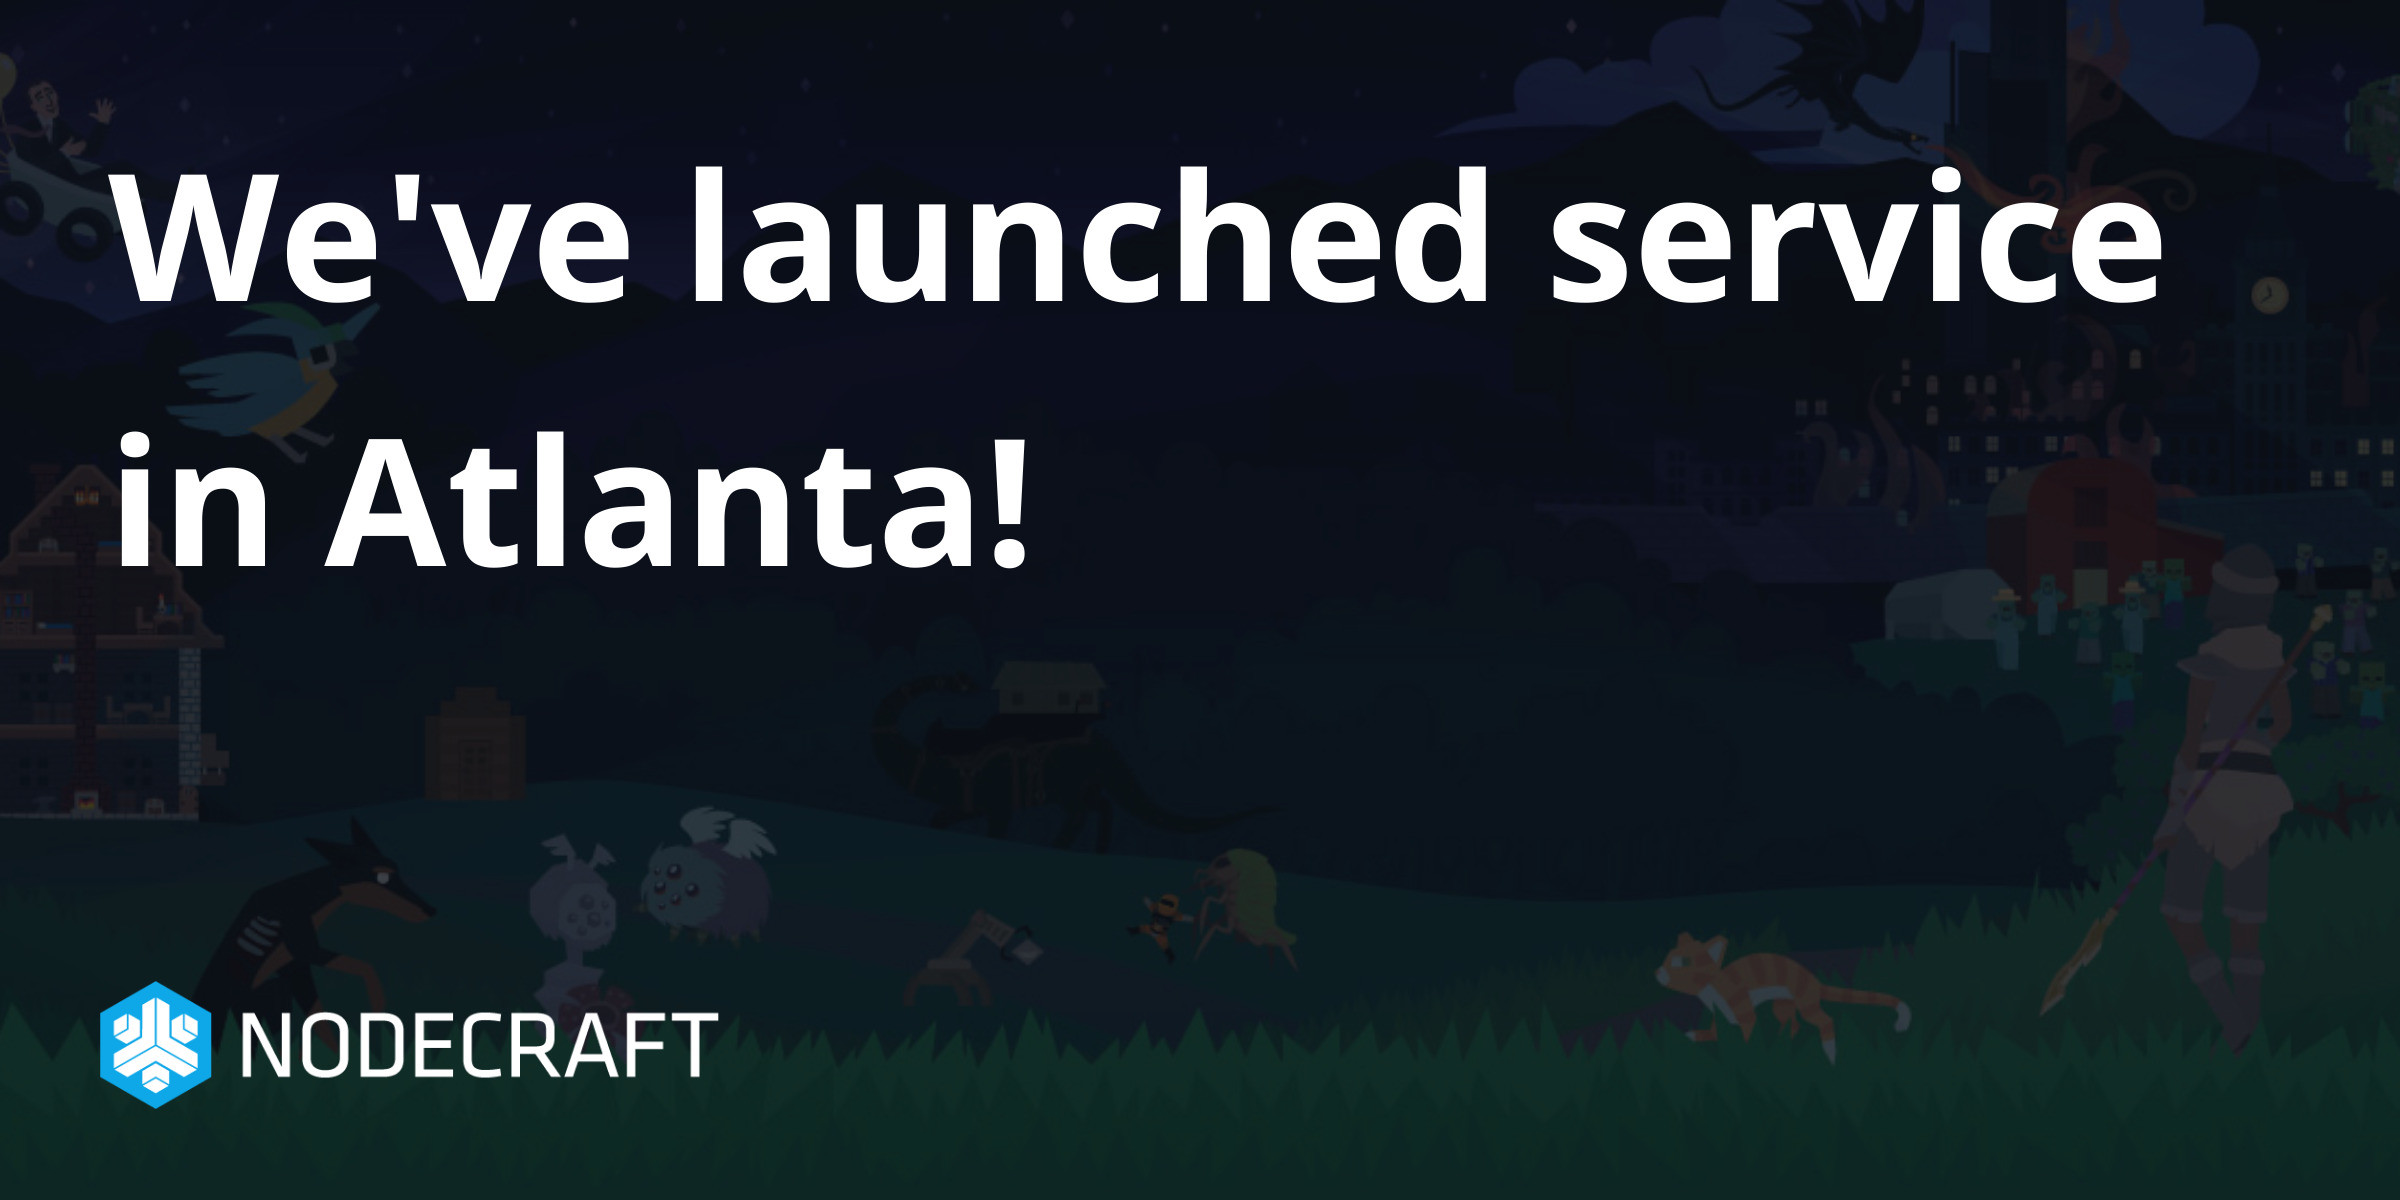 We've launched service in Atlanta!